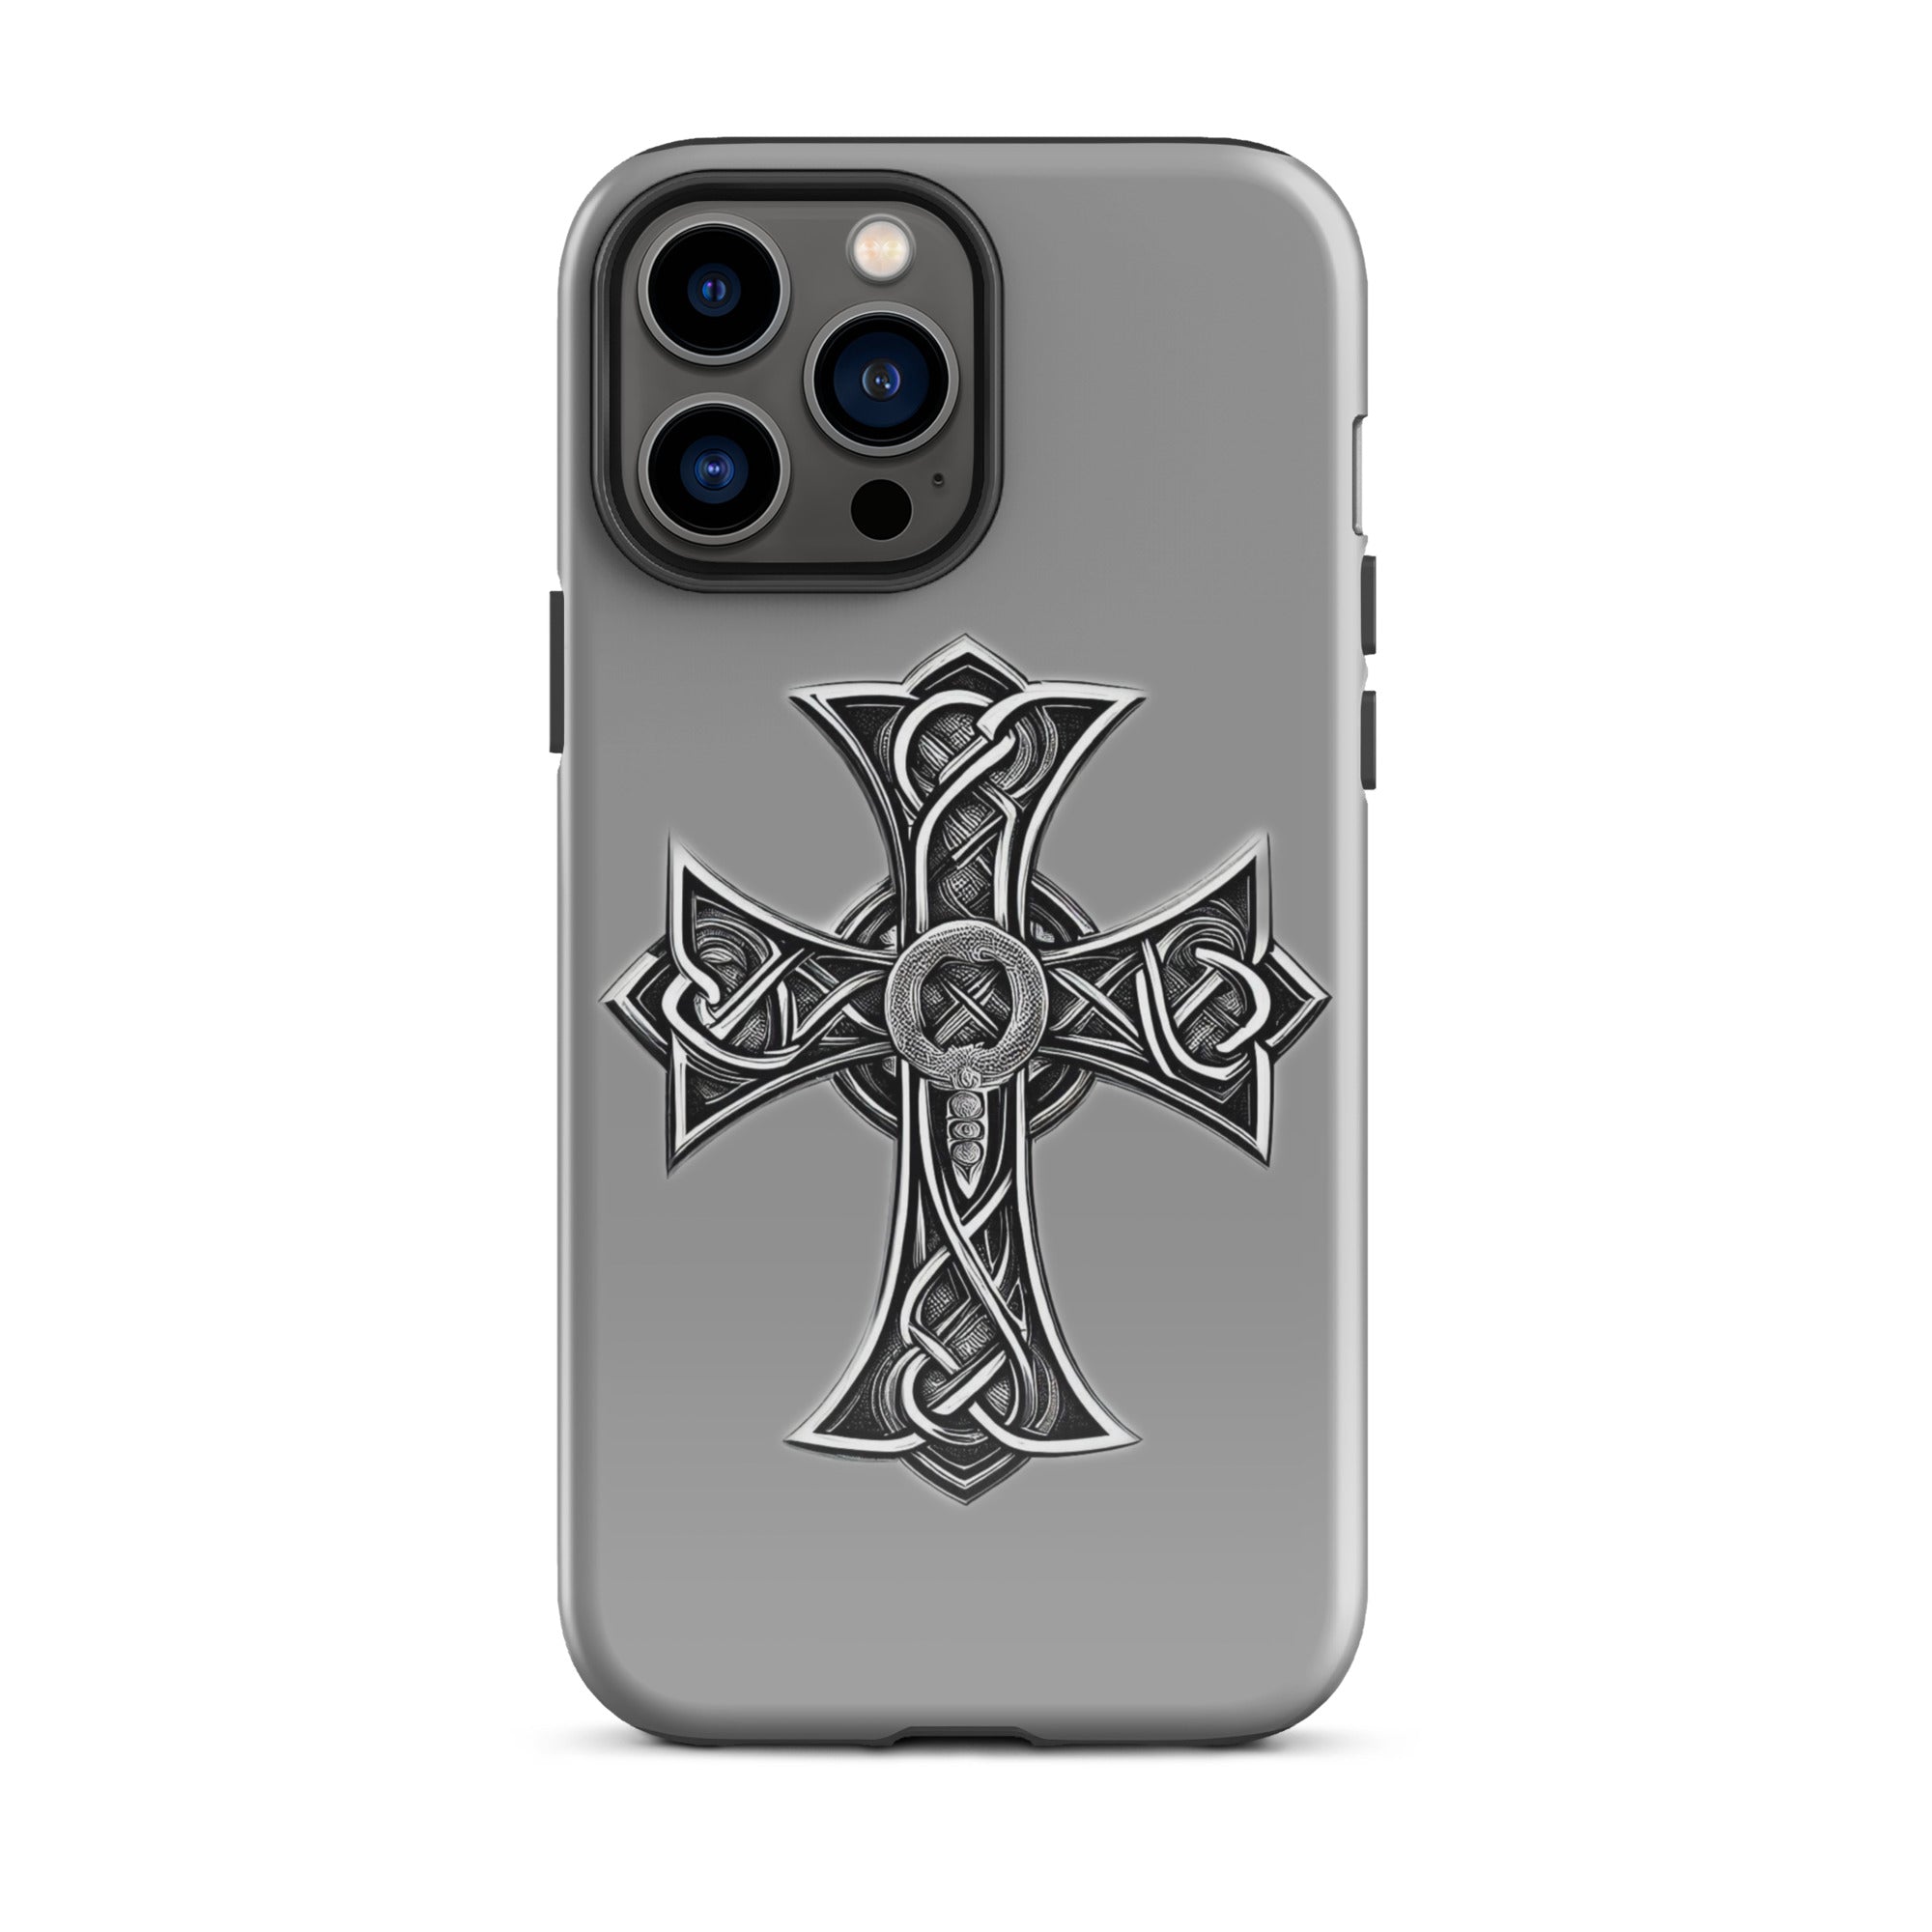 tough-case-for-iphone-glossy-iphone-13-pro-max-front-6563847714254.jpg